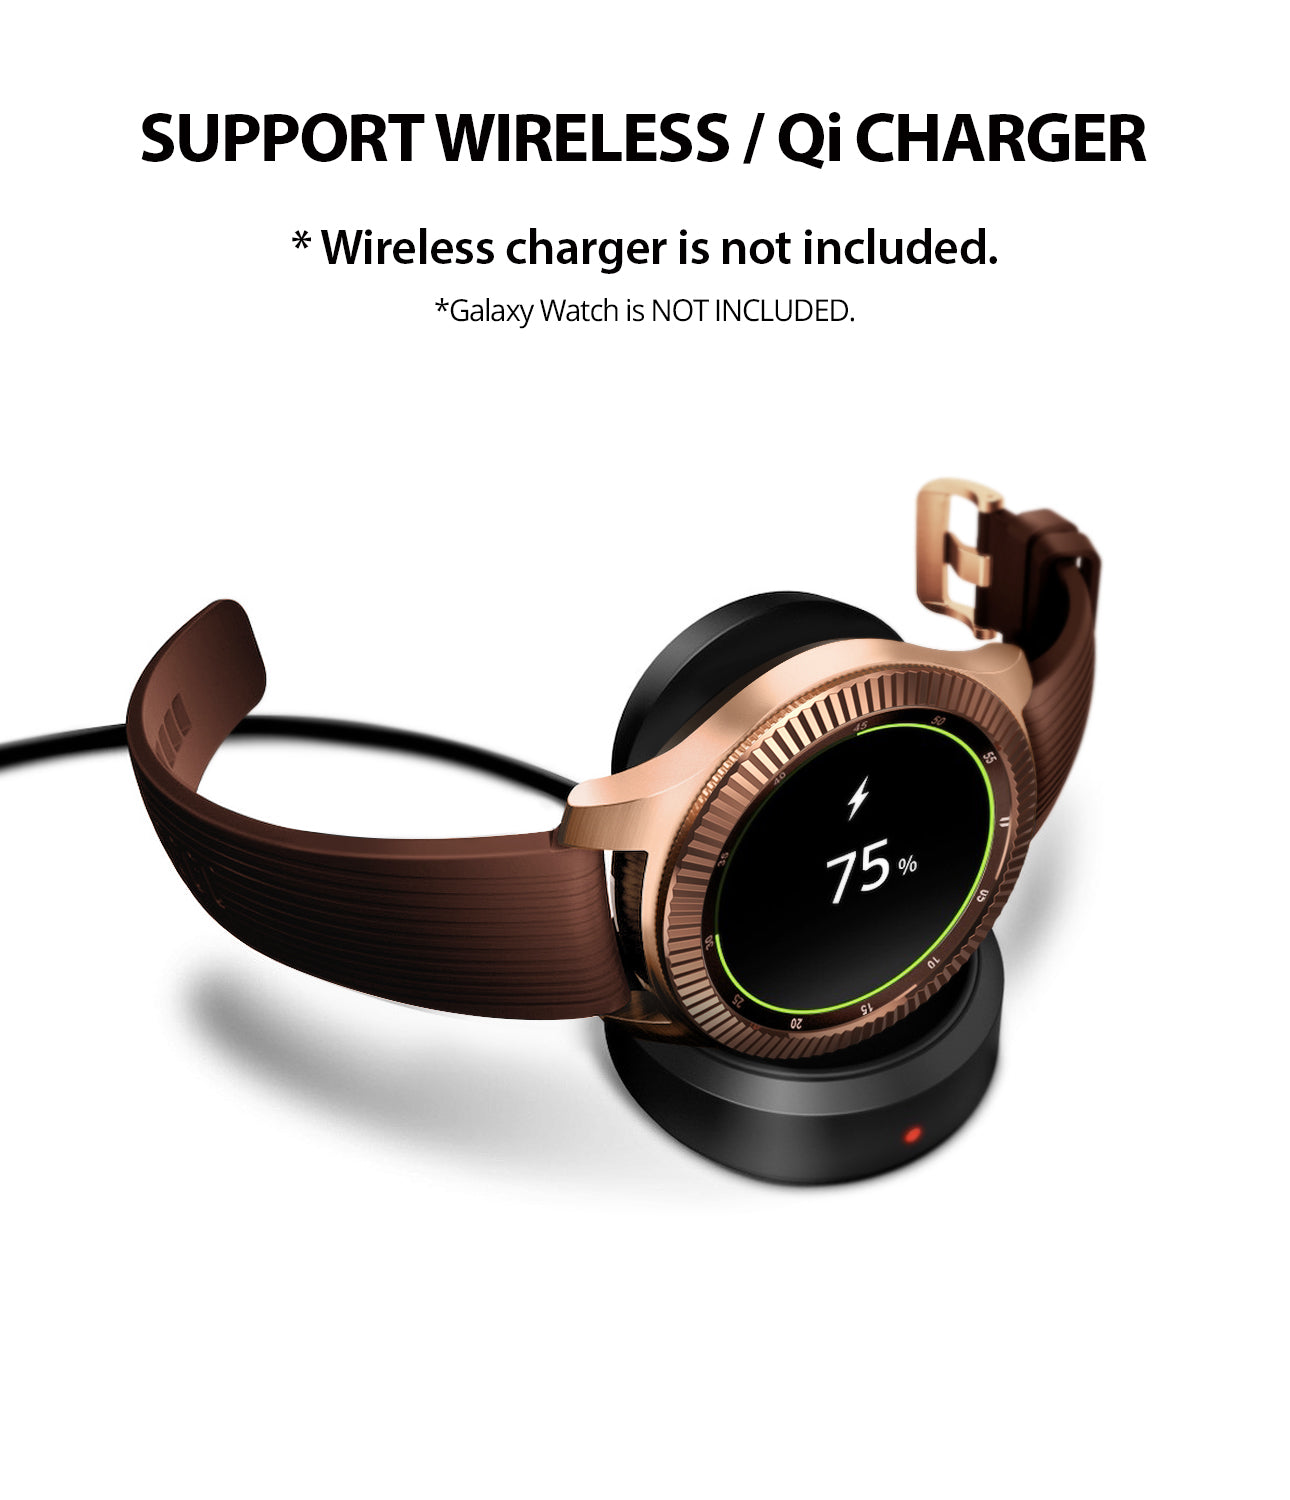 ringke bezel styling compatible with wireless, qi charging without removing the cover